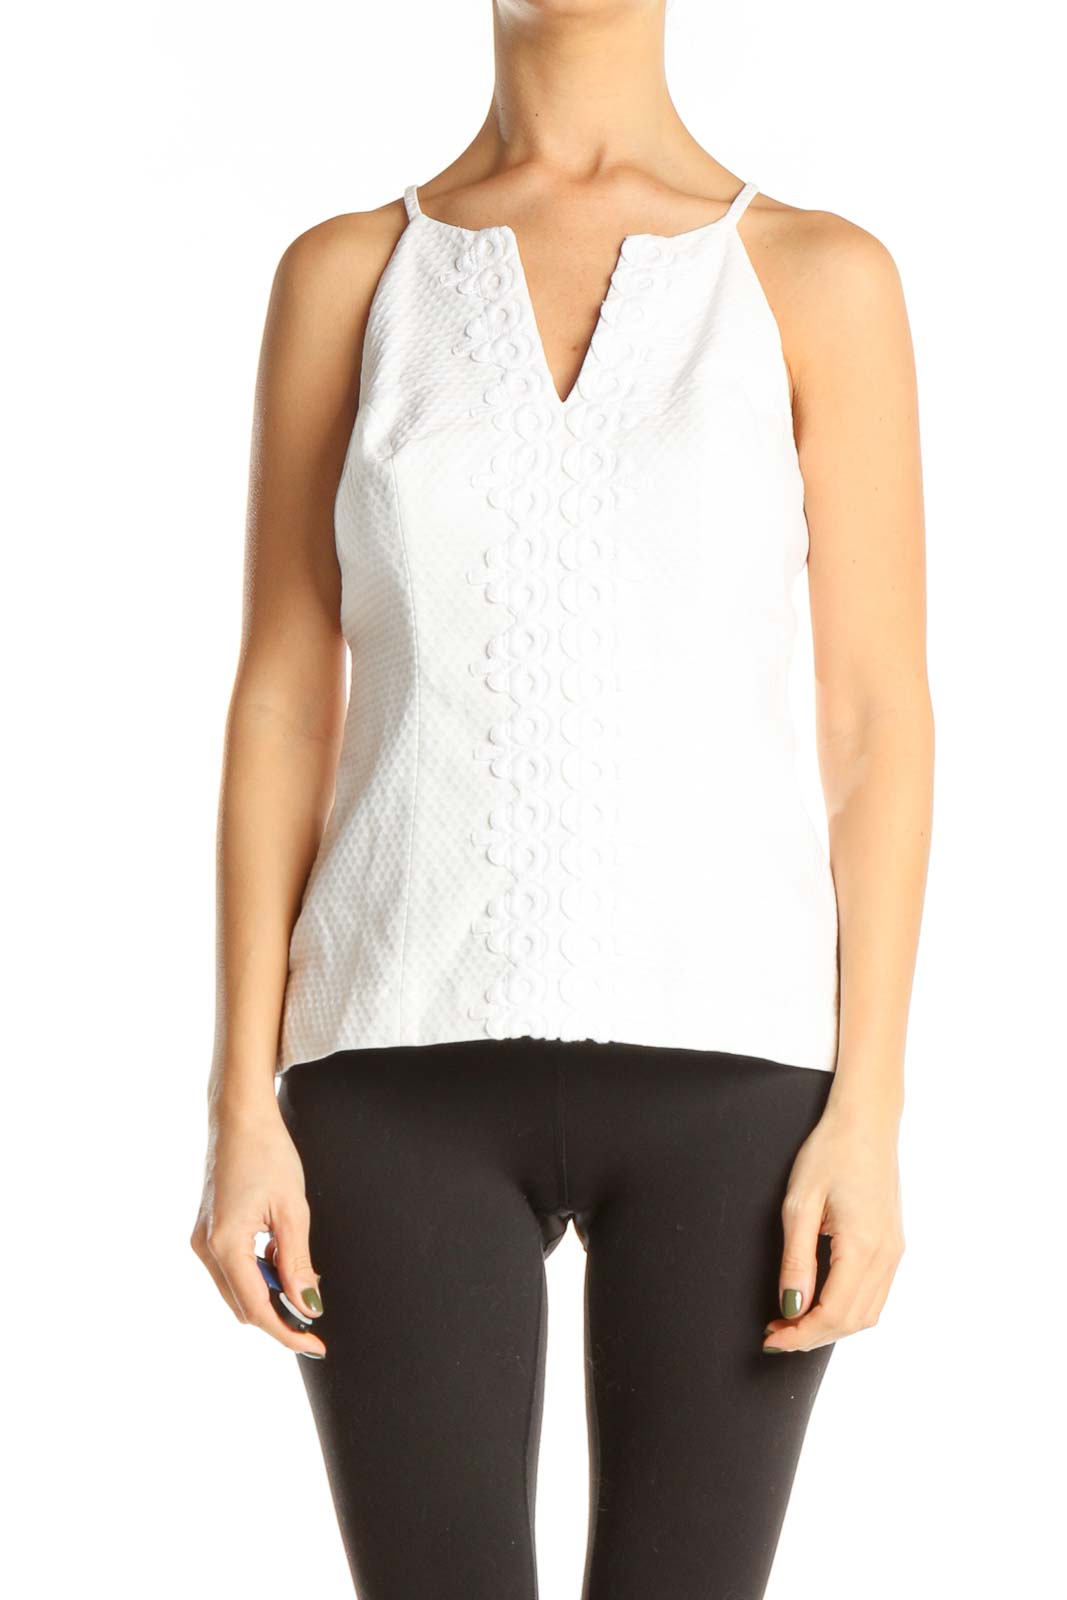 White Textured Chic Tank Top Front